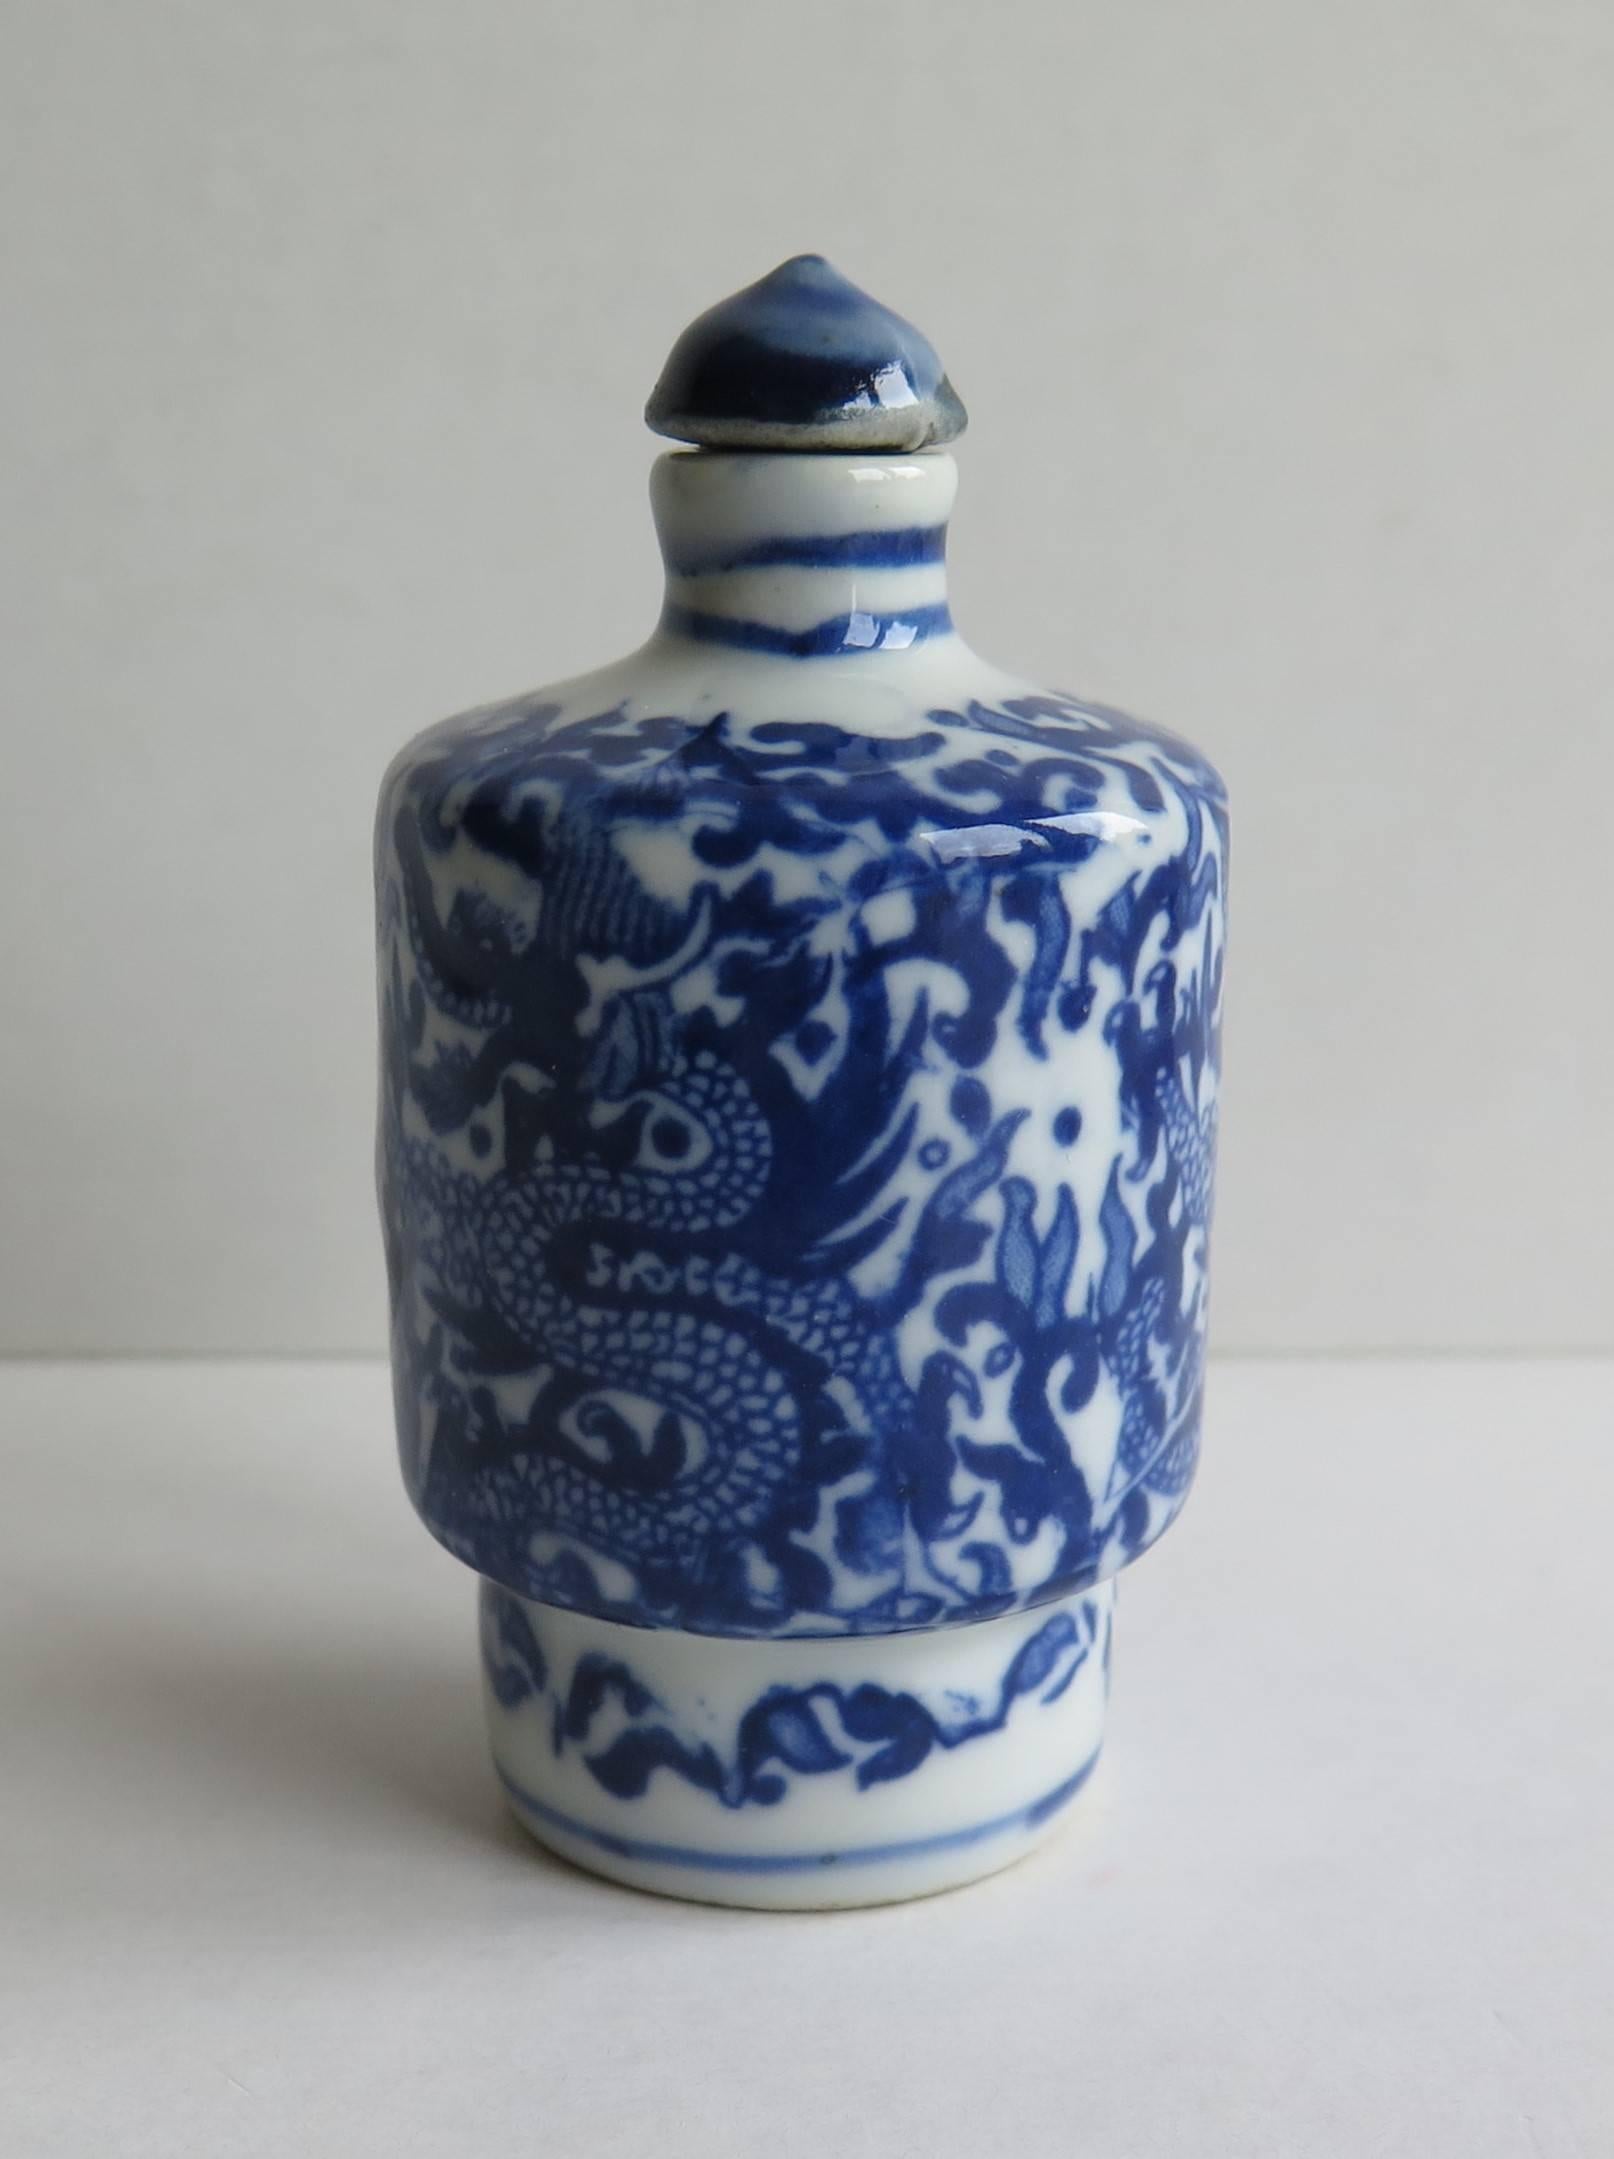 This is a good quality Chinese snuff bottle, made from porcelain, circa 1925.

The cylindrical bottle has a deep foot and narrow neck. The main decoration depicts a well painted continuous dragon design decorated in varying shades of under-glaze